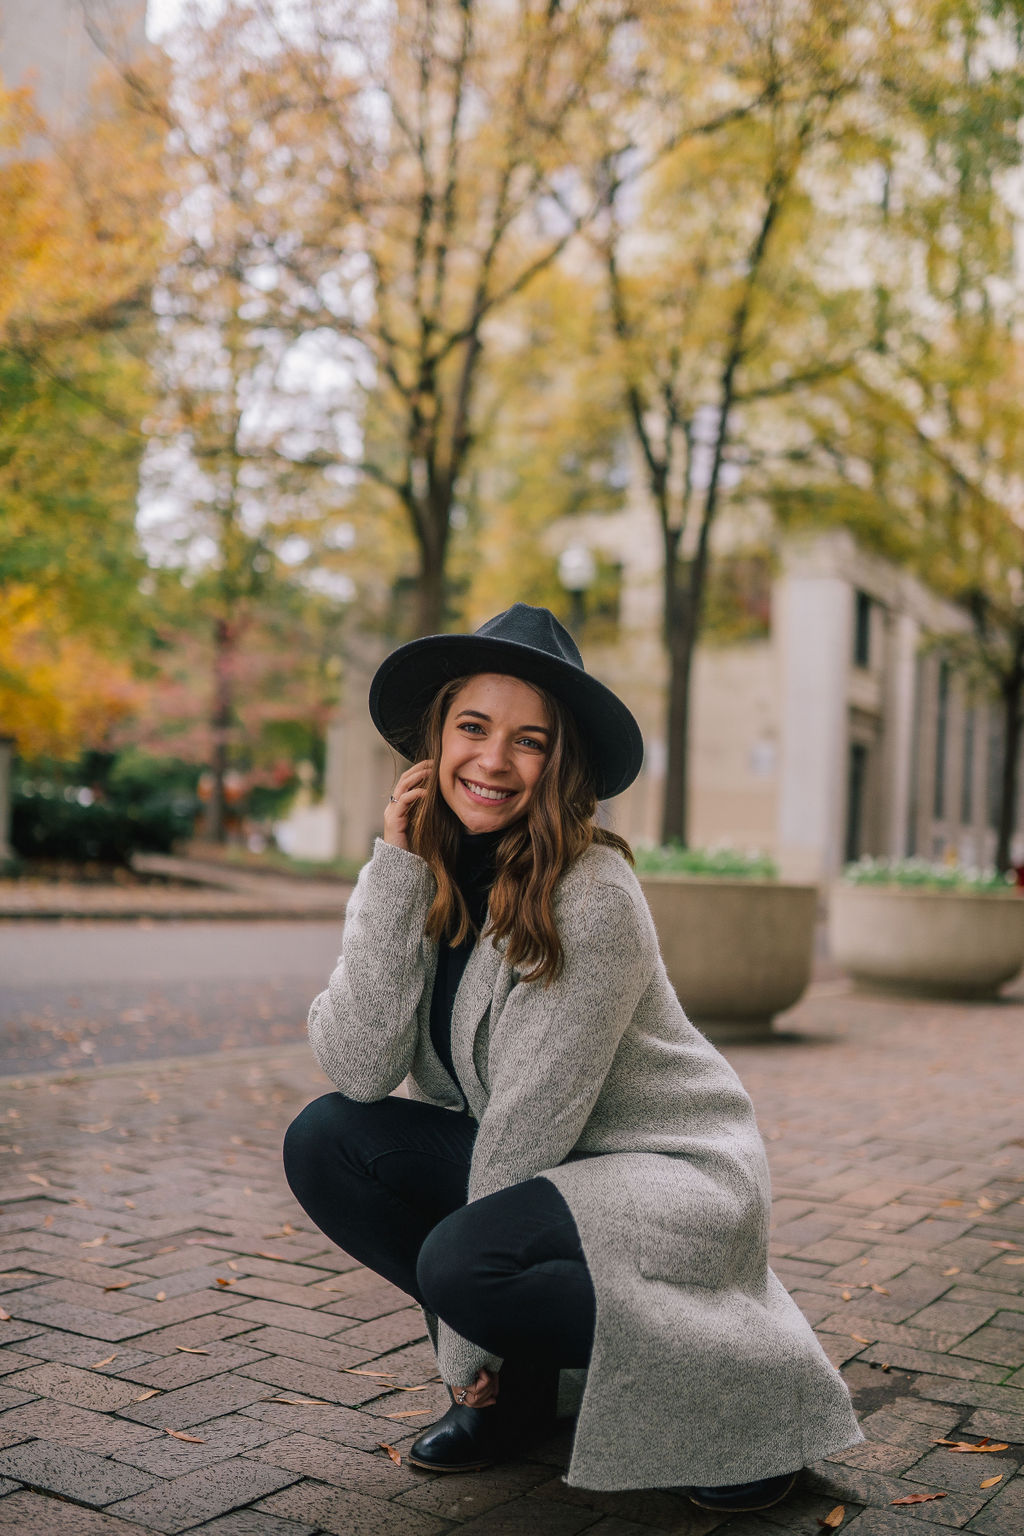 Anna kneeling and smiling wearing a long grey coat and black hat